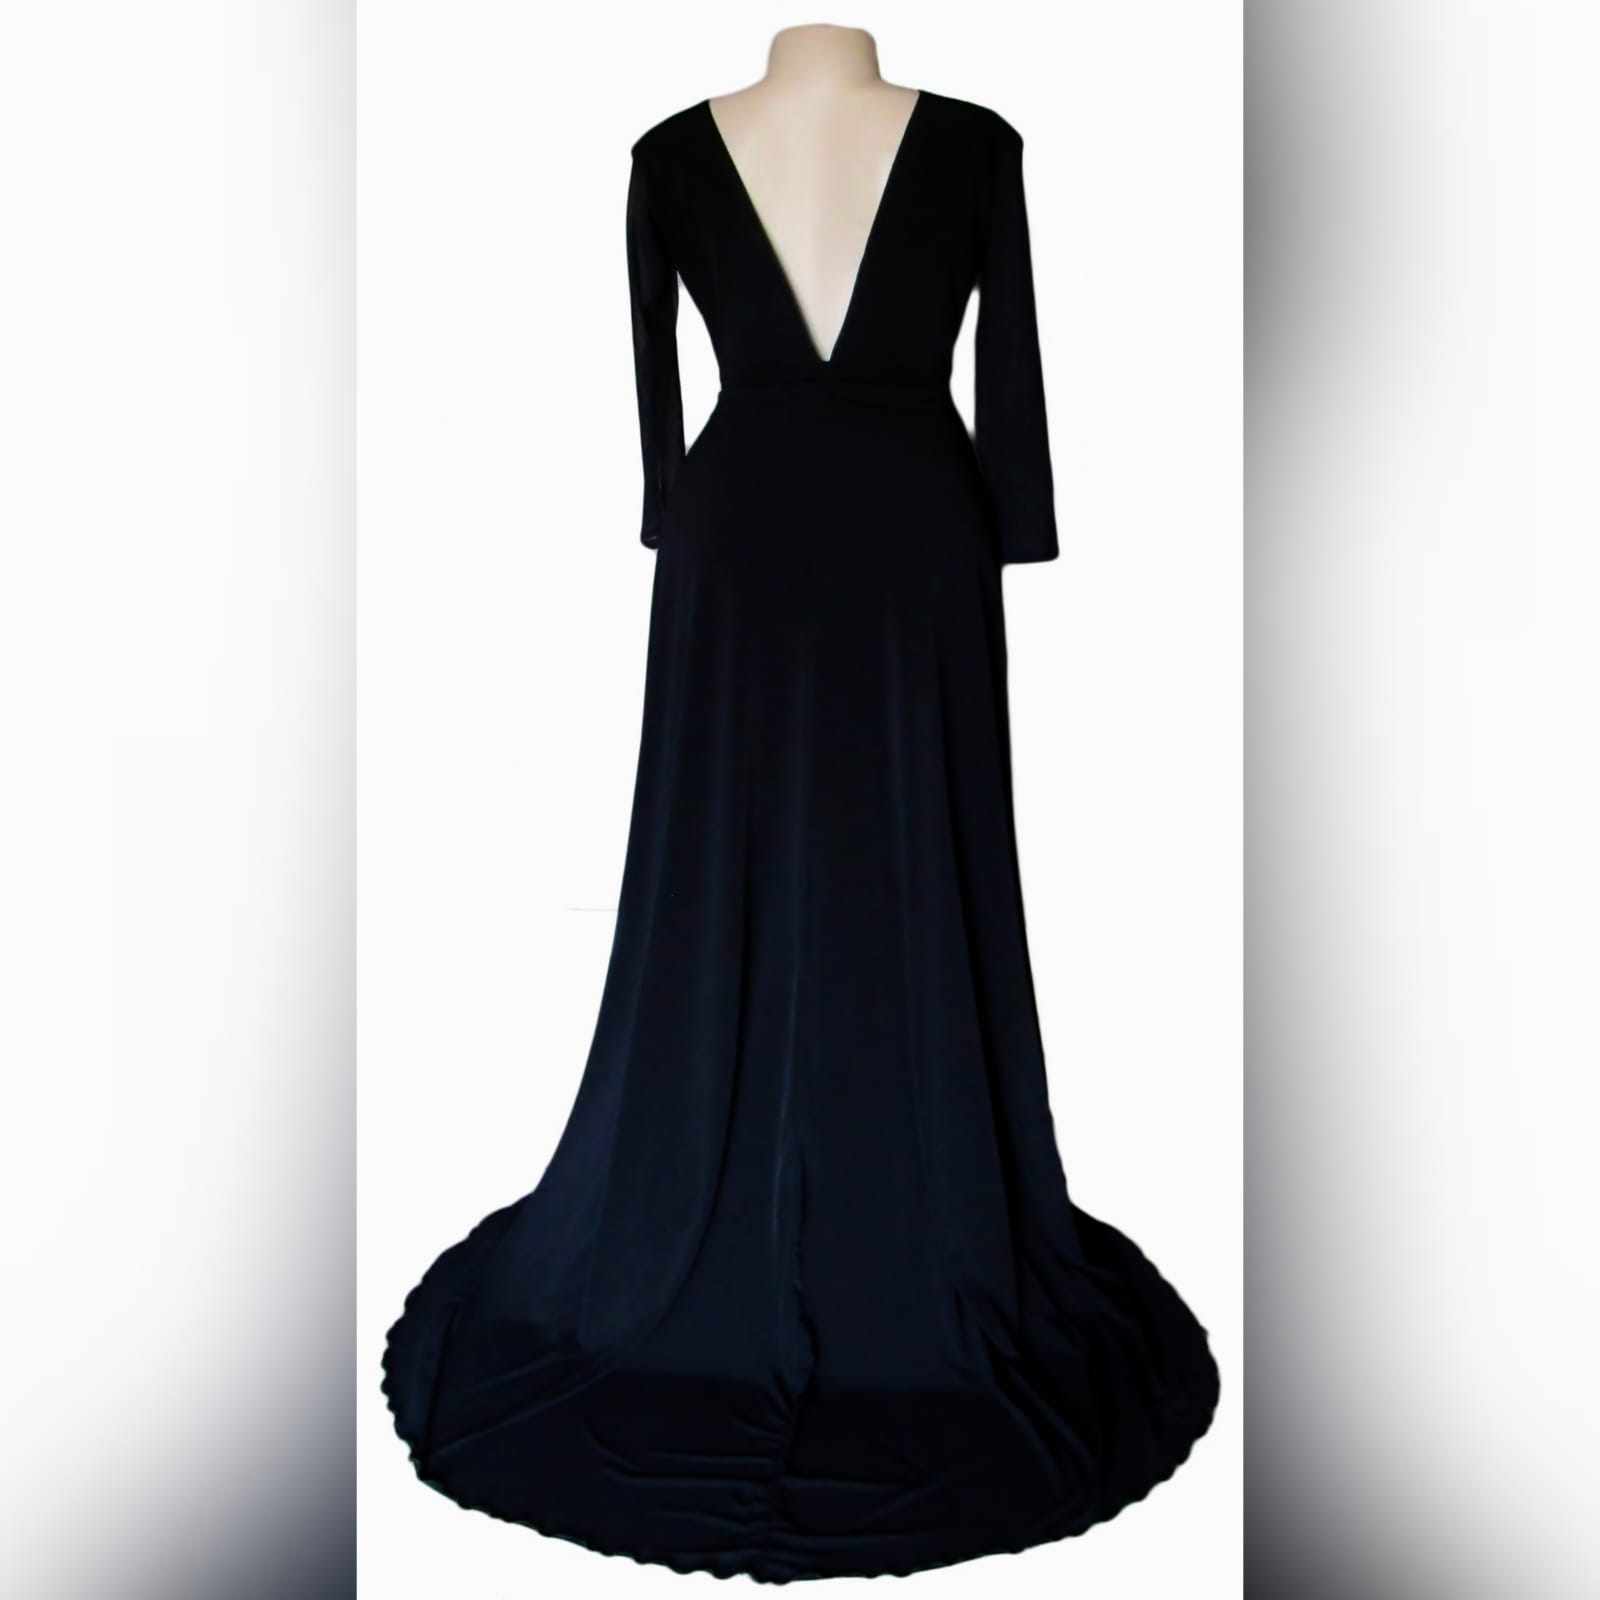 Black simple long formal dress 2 black simple long prom dress with a front and back v neckline. With translucent long sleeves. Slit and a train.